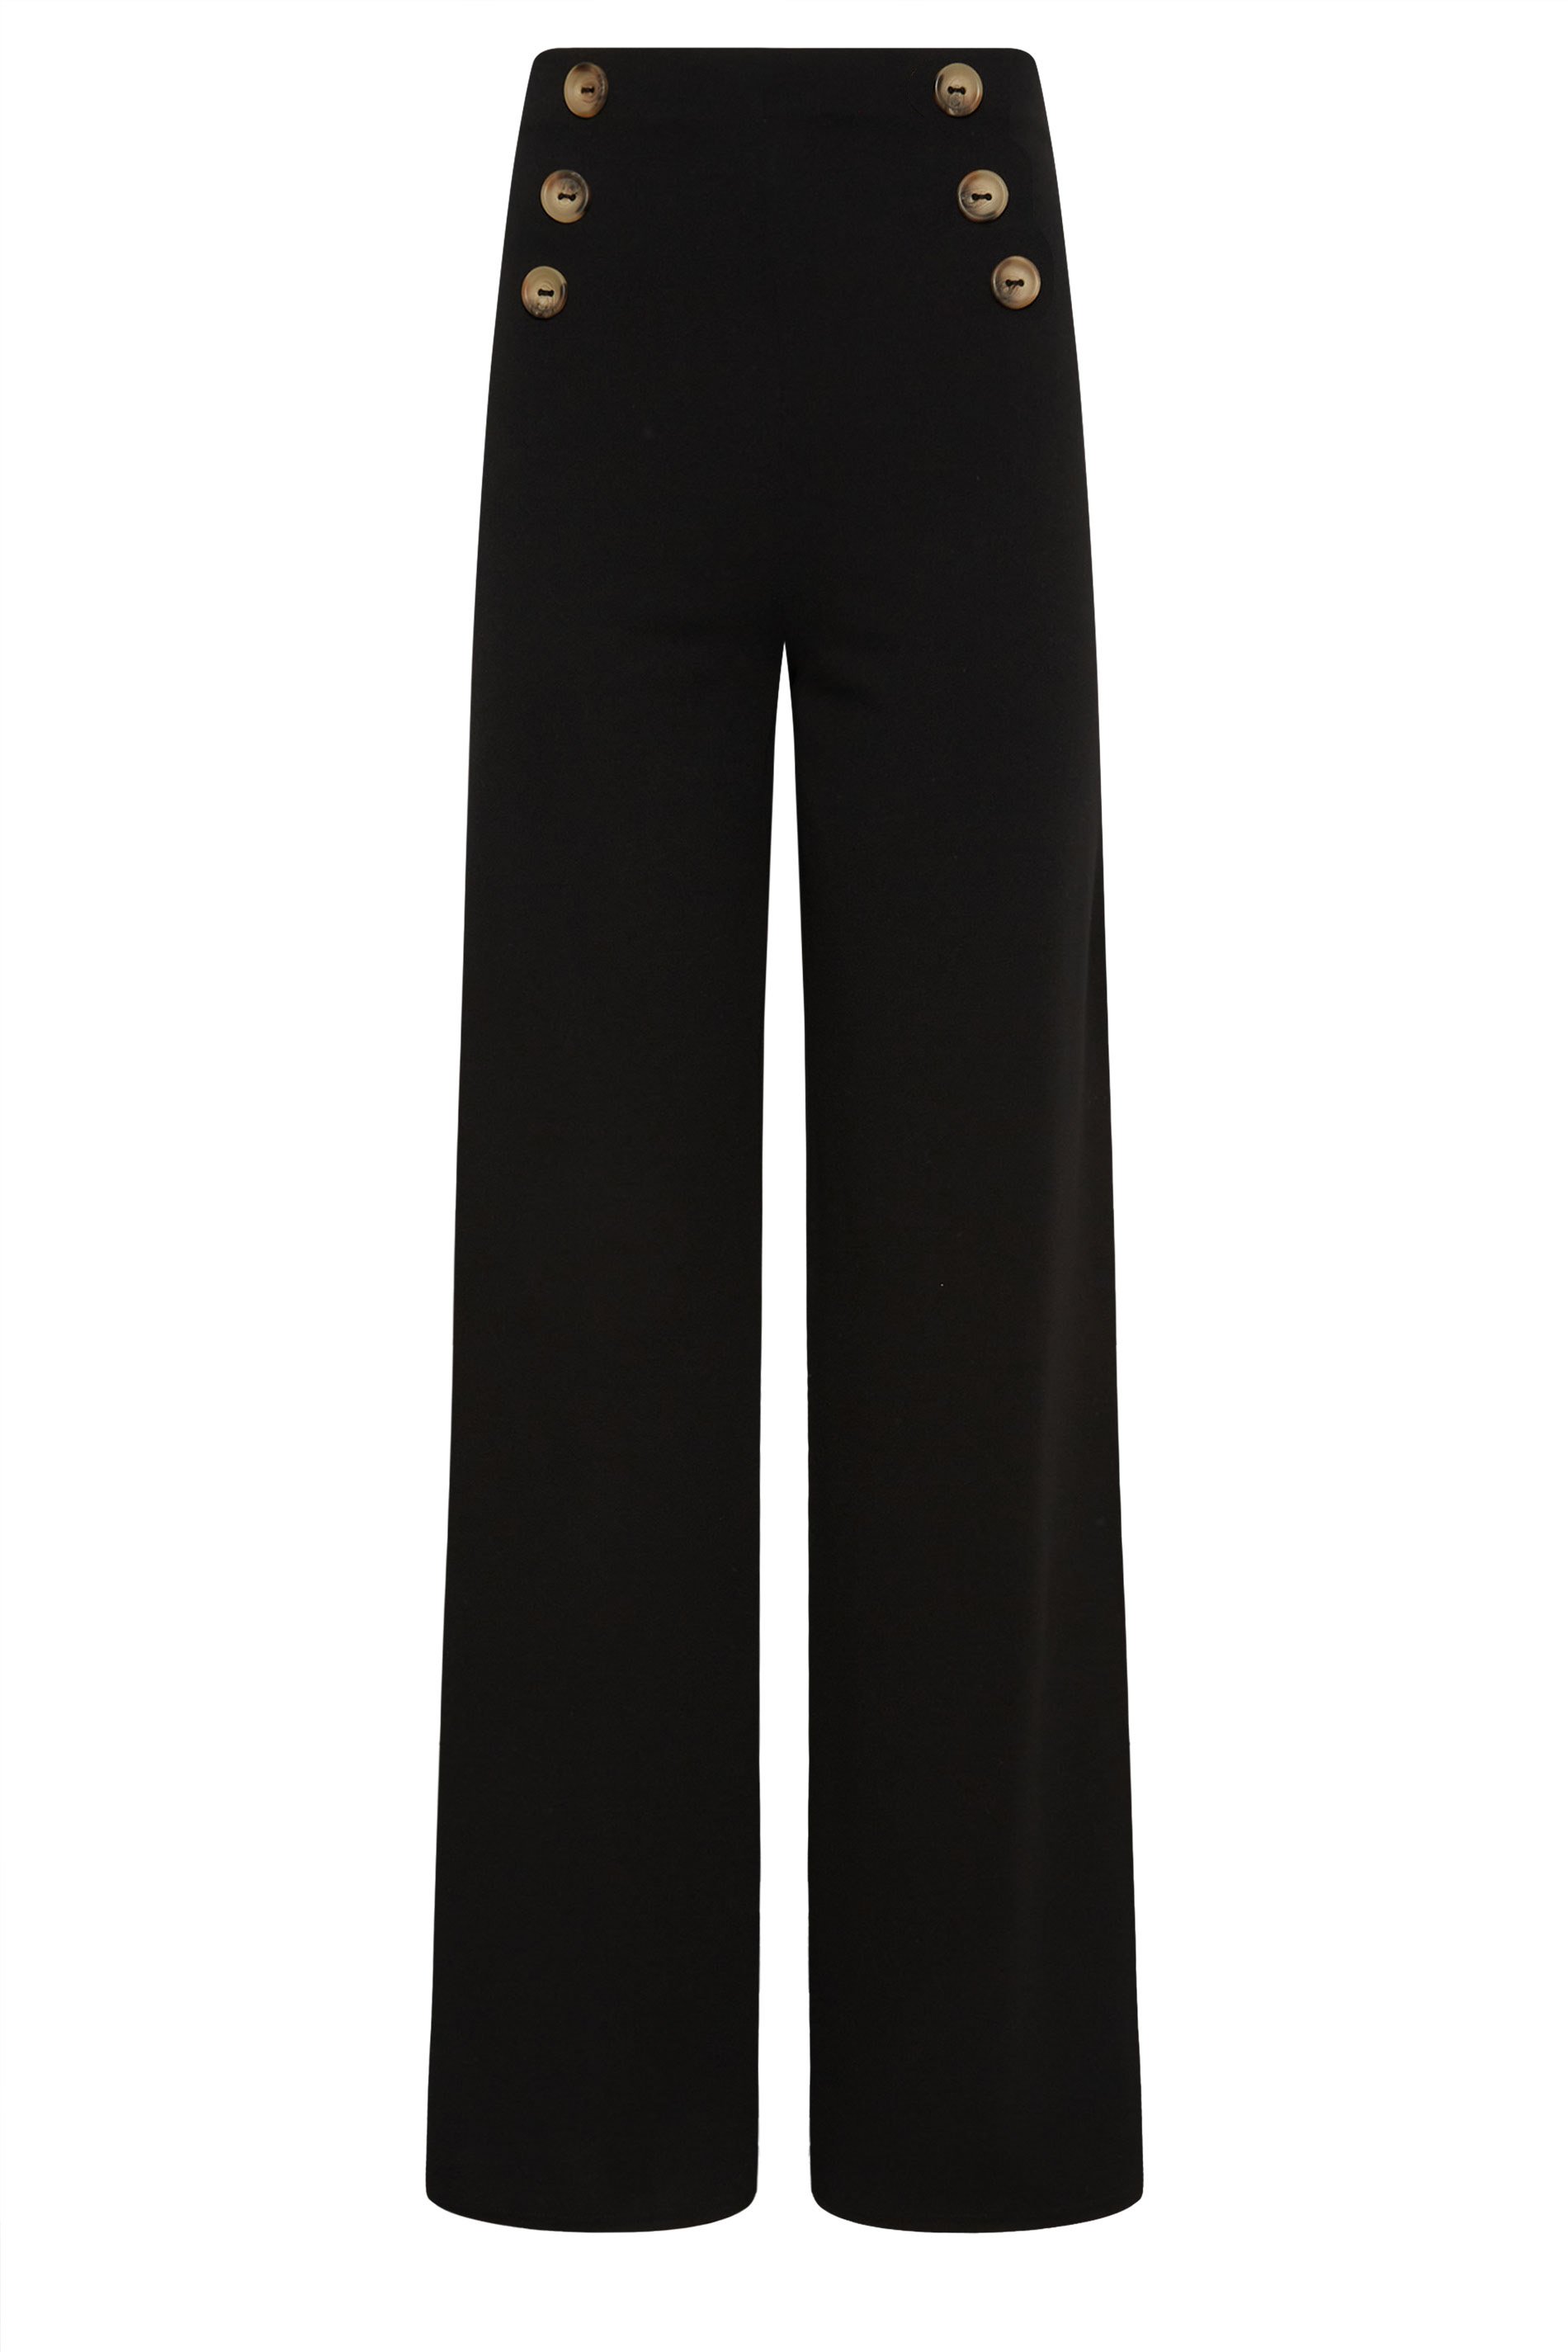 Y.A.S stretch high waisted trousers with button detail in black | ASOS